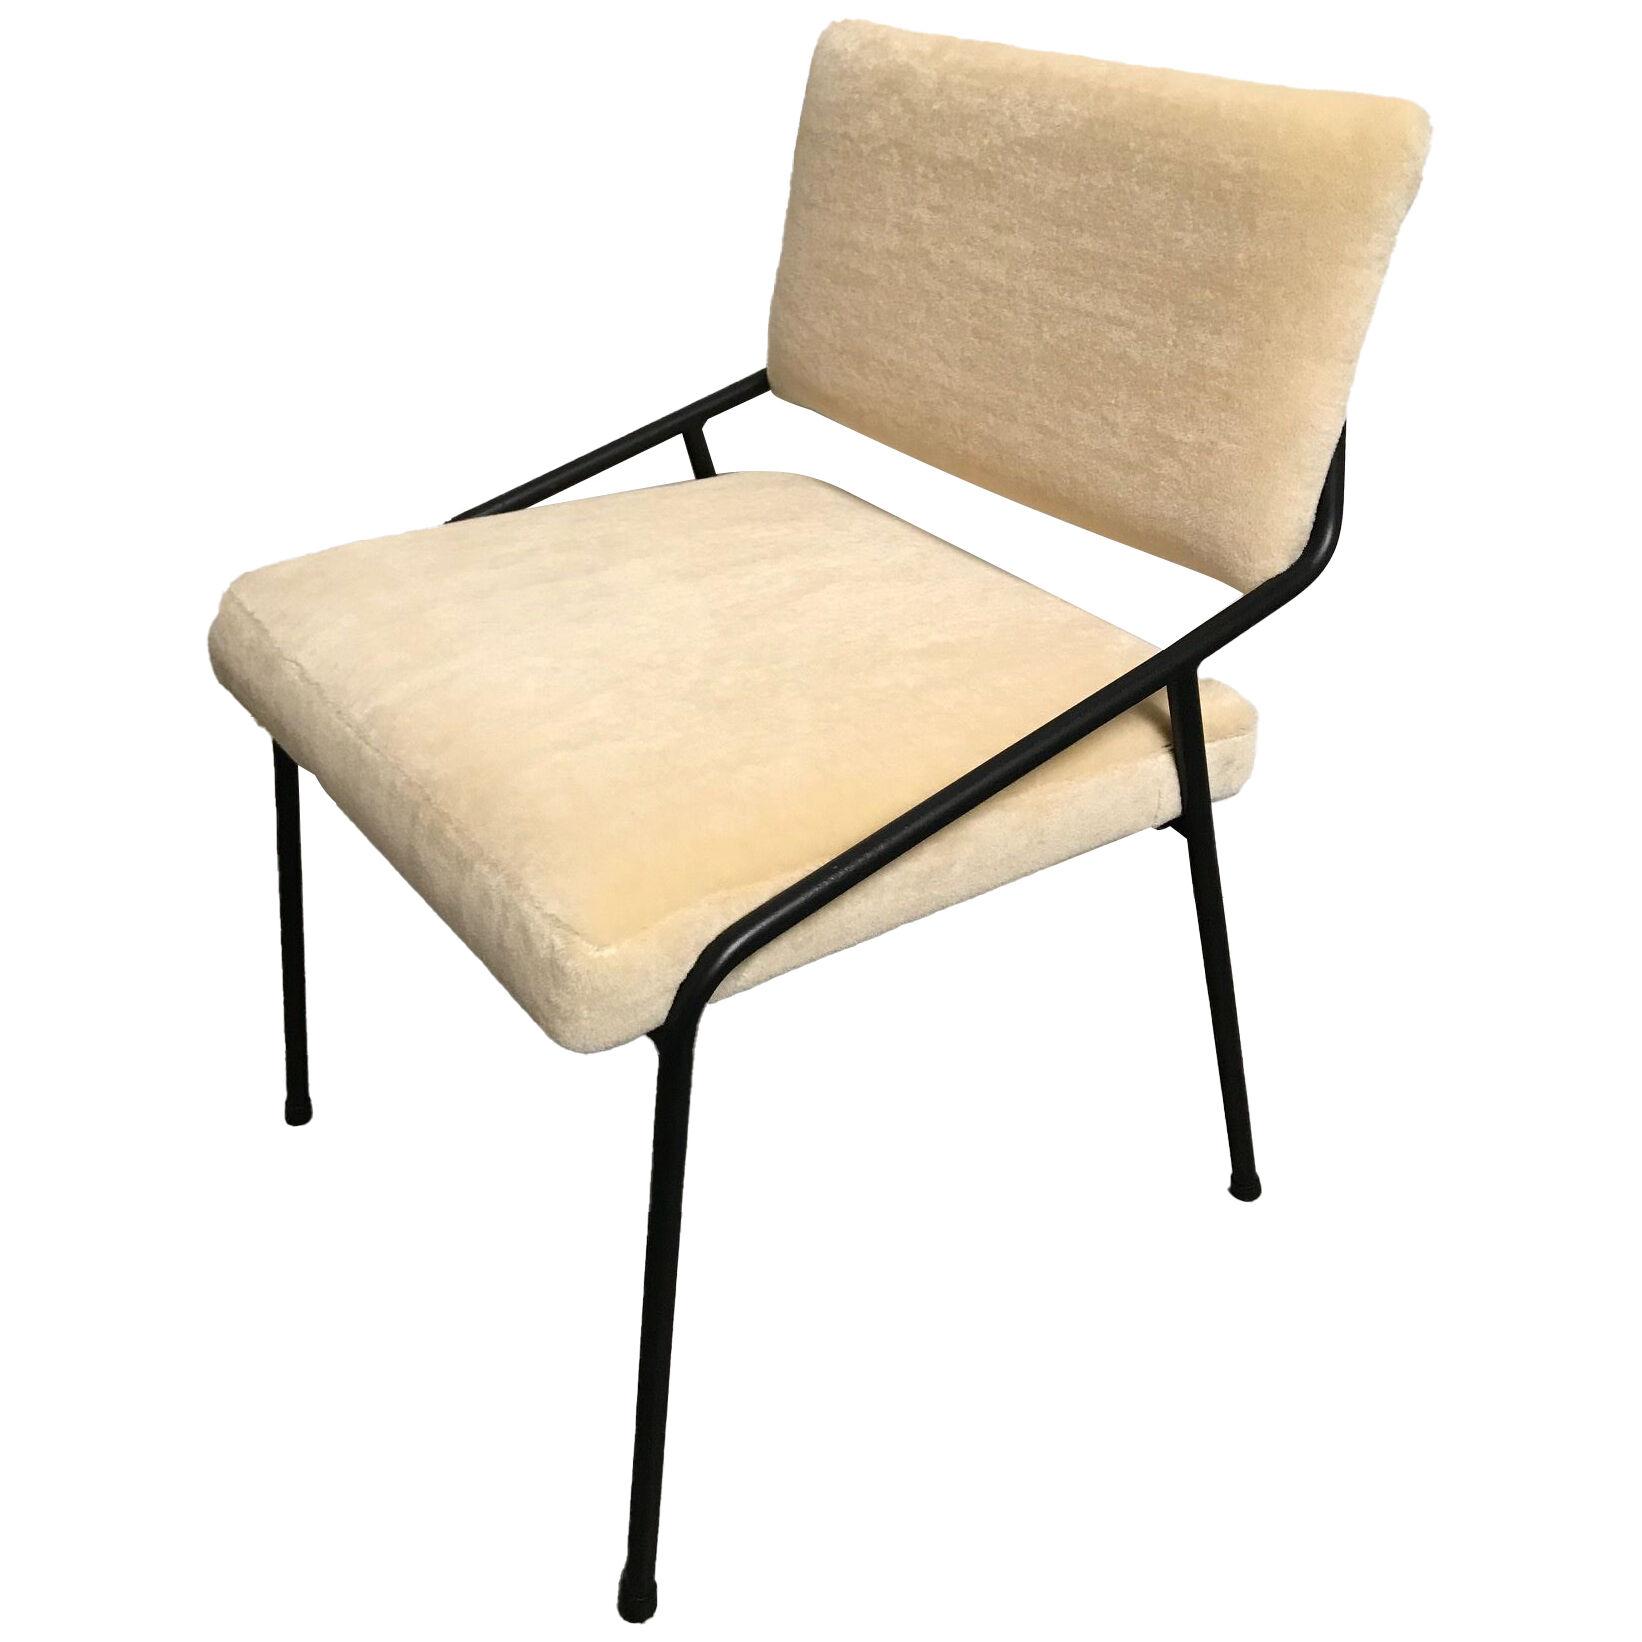 Chair Model n°159 by Alain Richard for Meubles TV Editions